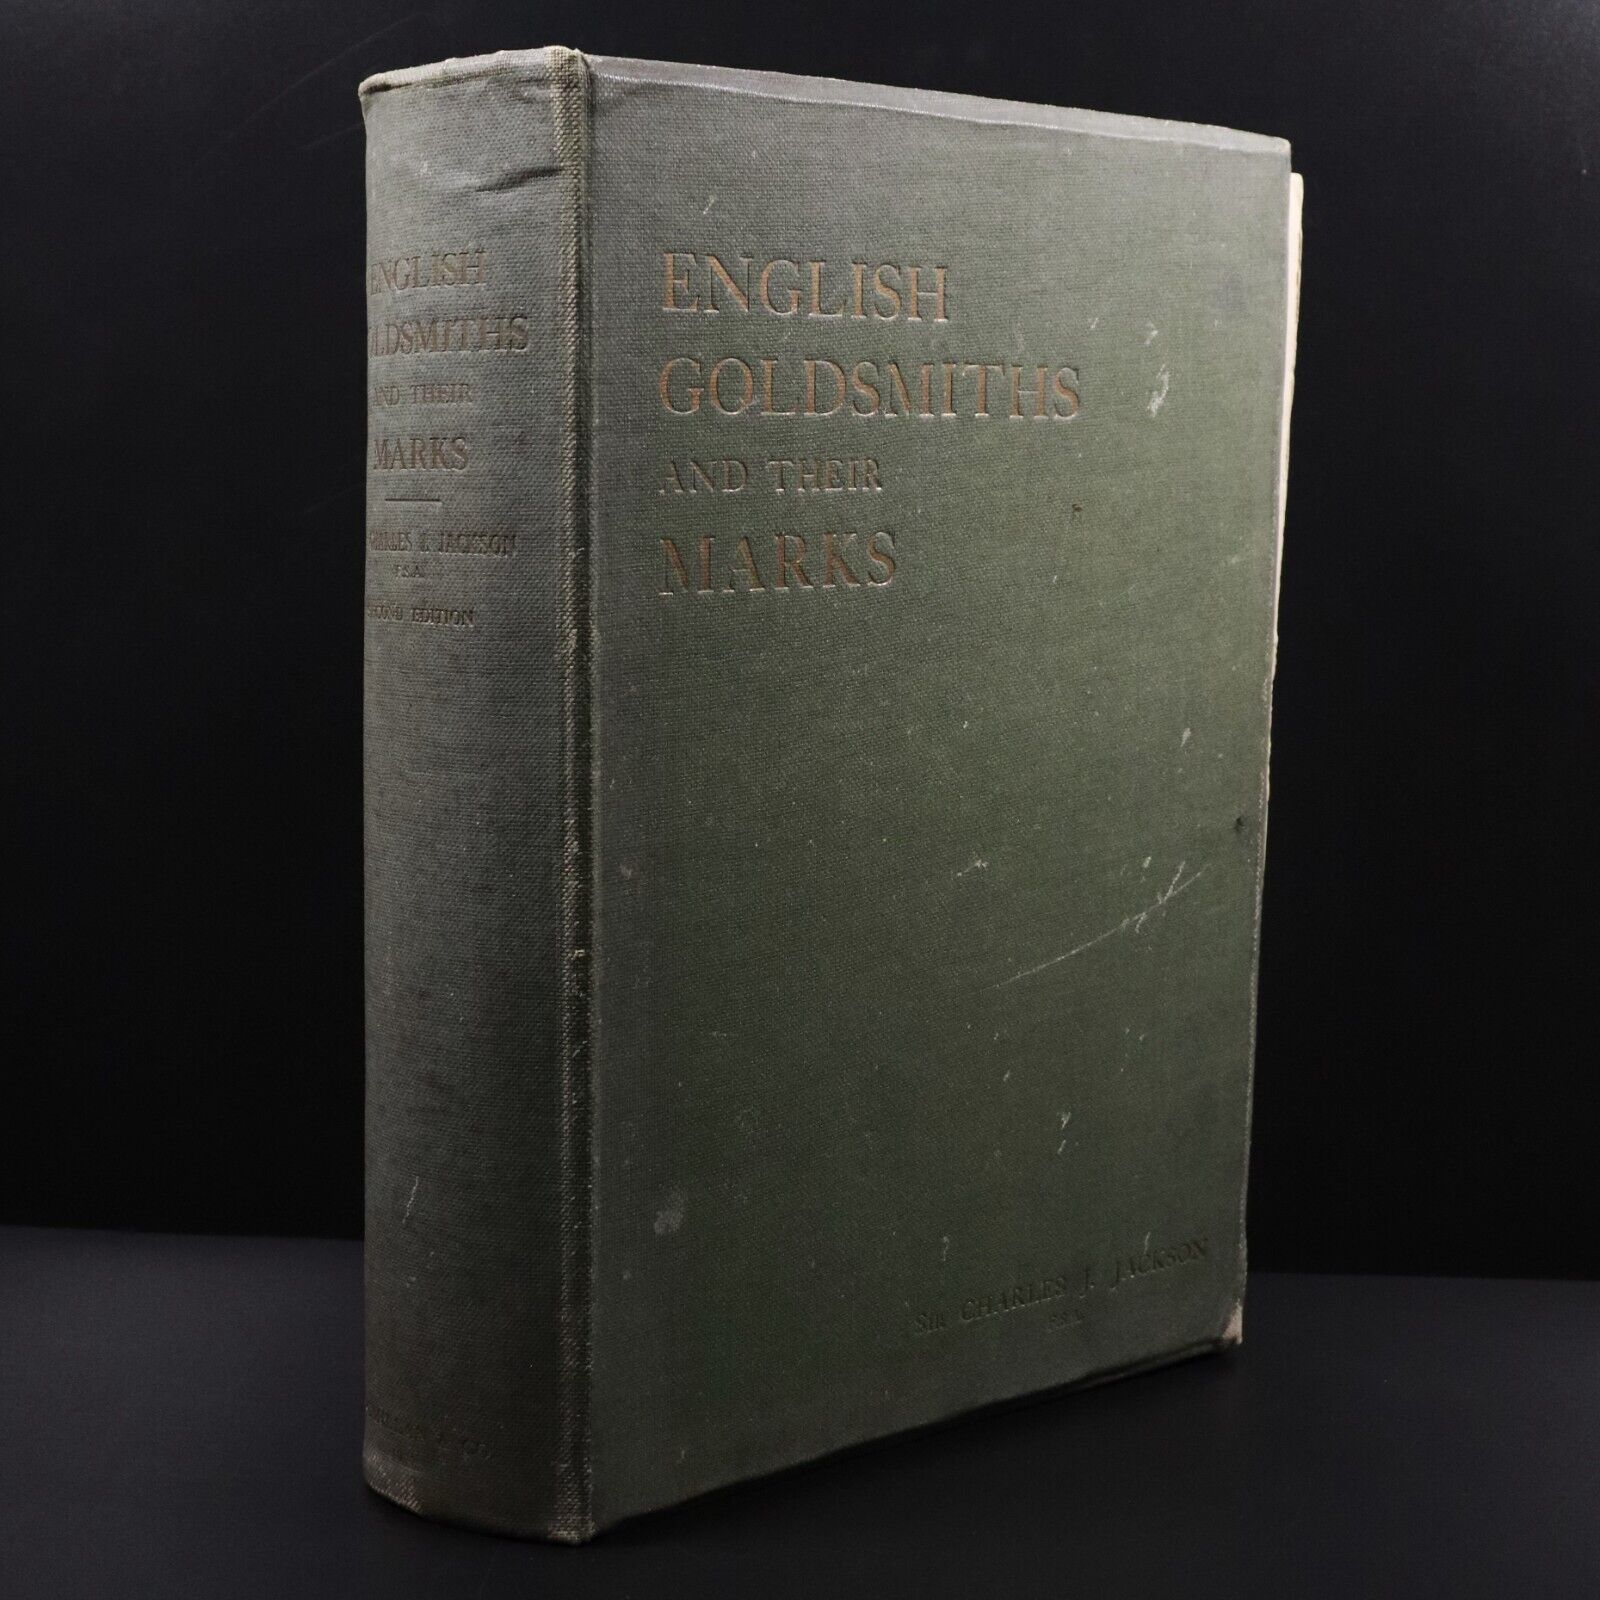 1921 English Goldsmiths And Their Marks by C.J. Jackson Antique Reference Book